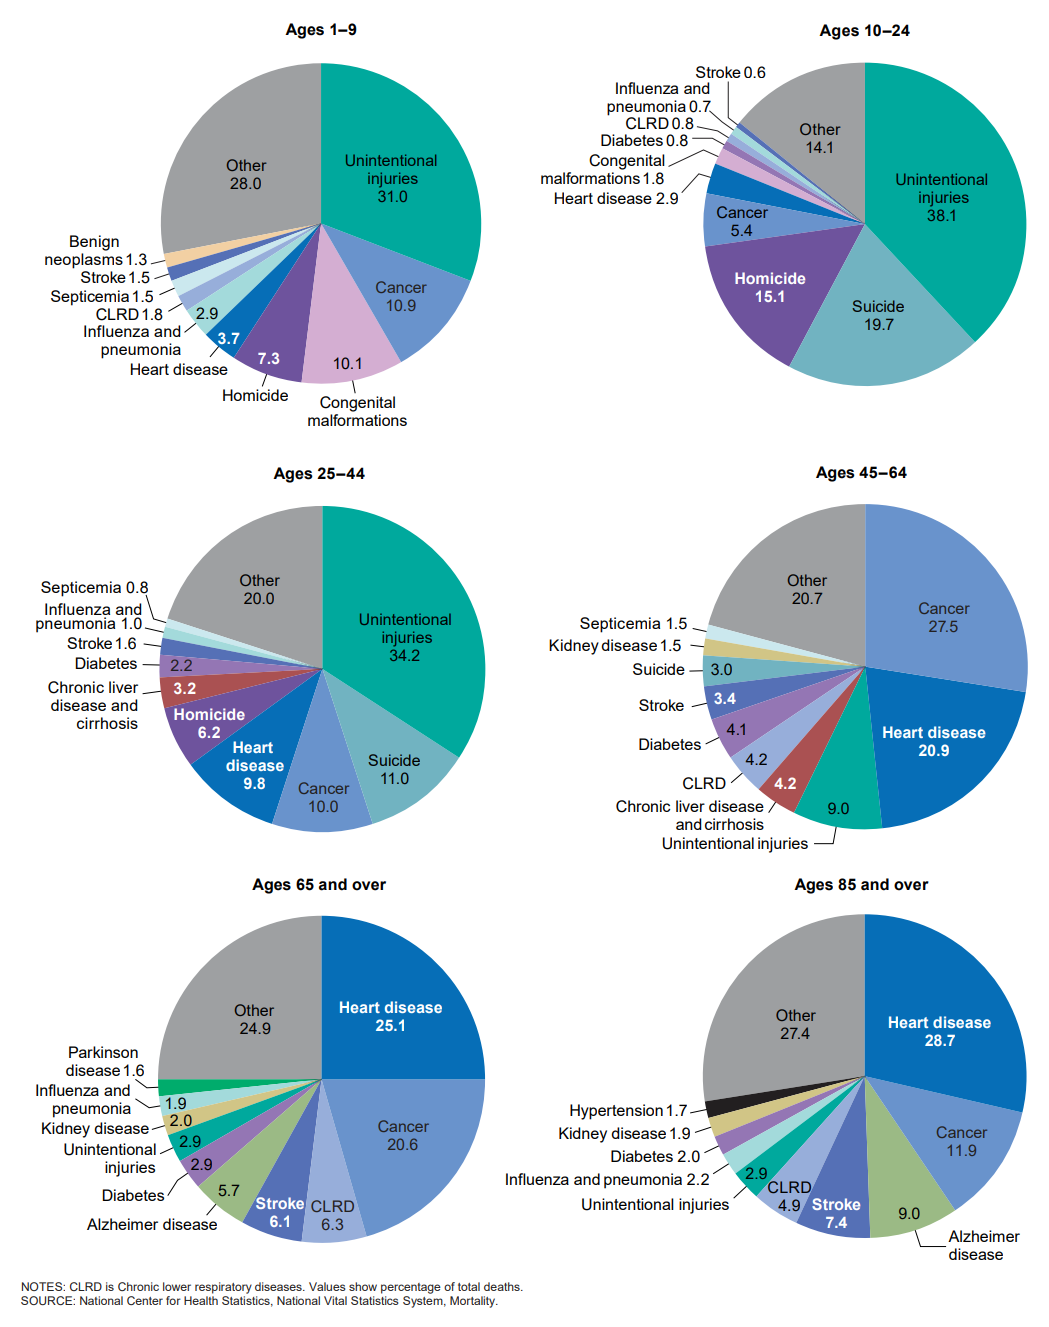 6 pie charts showing causes of death by age ranges. Among adults aged 65+, heart disease, cancer, Alzheimer's, and Strokes top the list, along with the varge section containing "Other" causes.